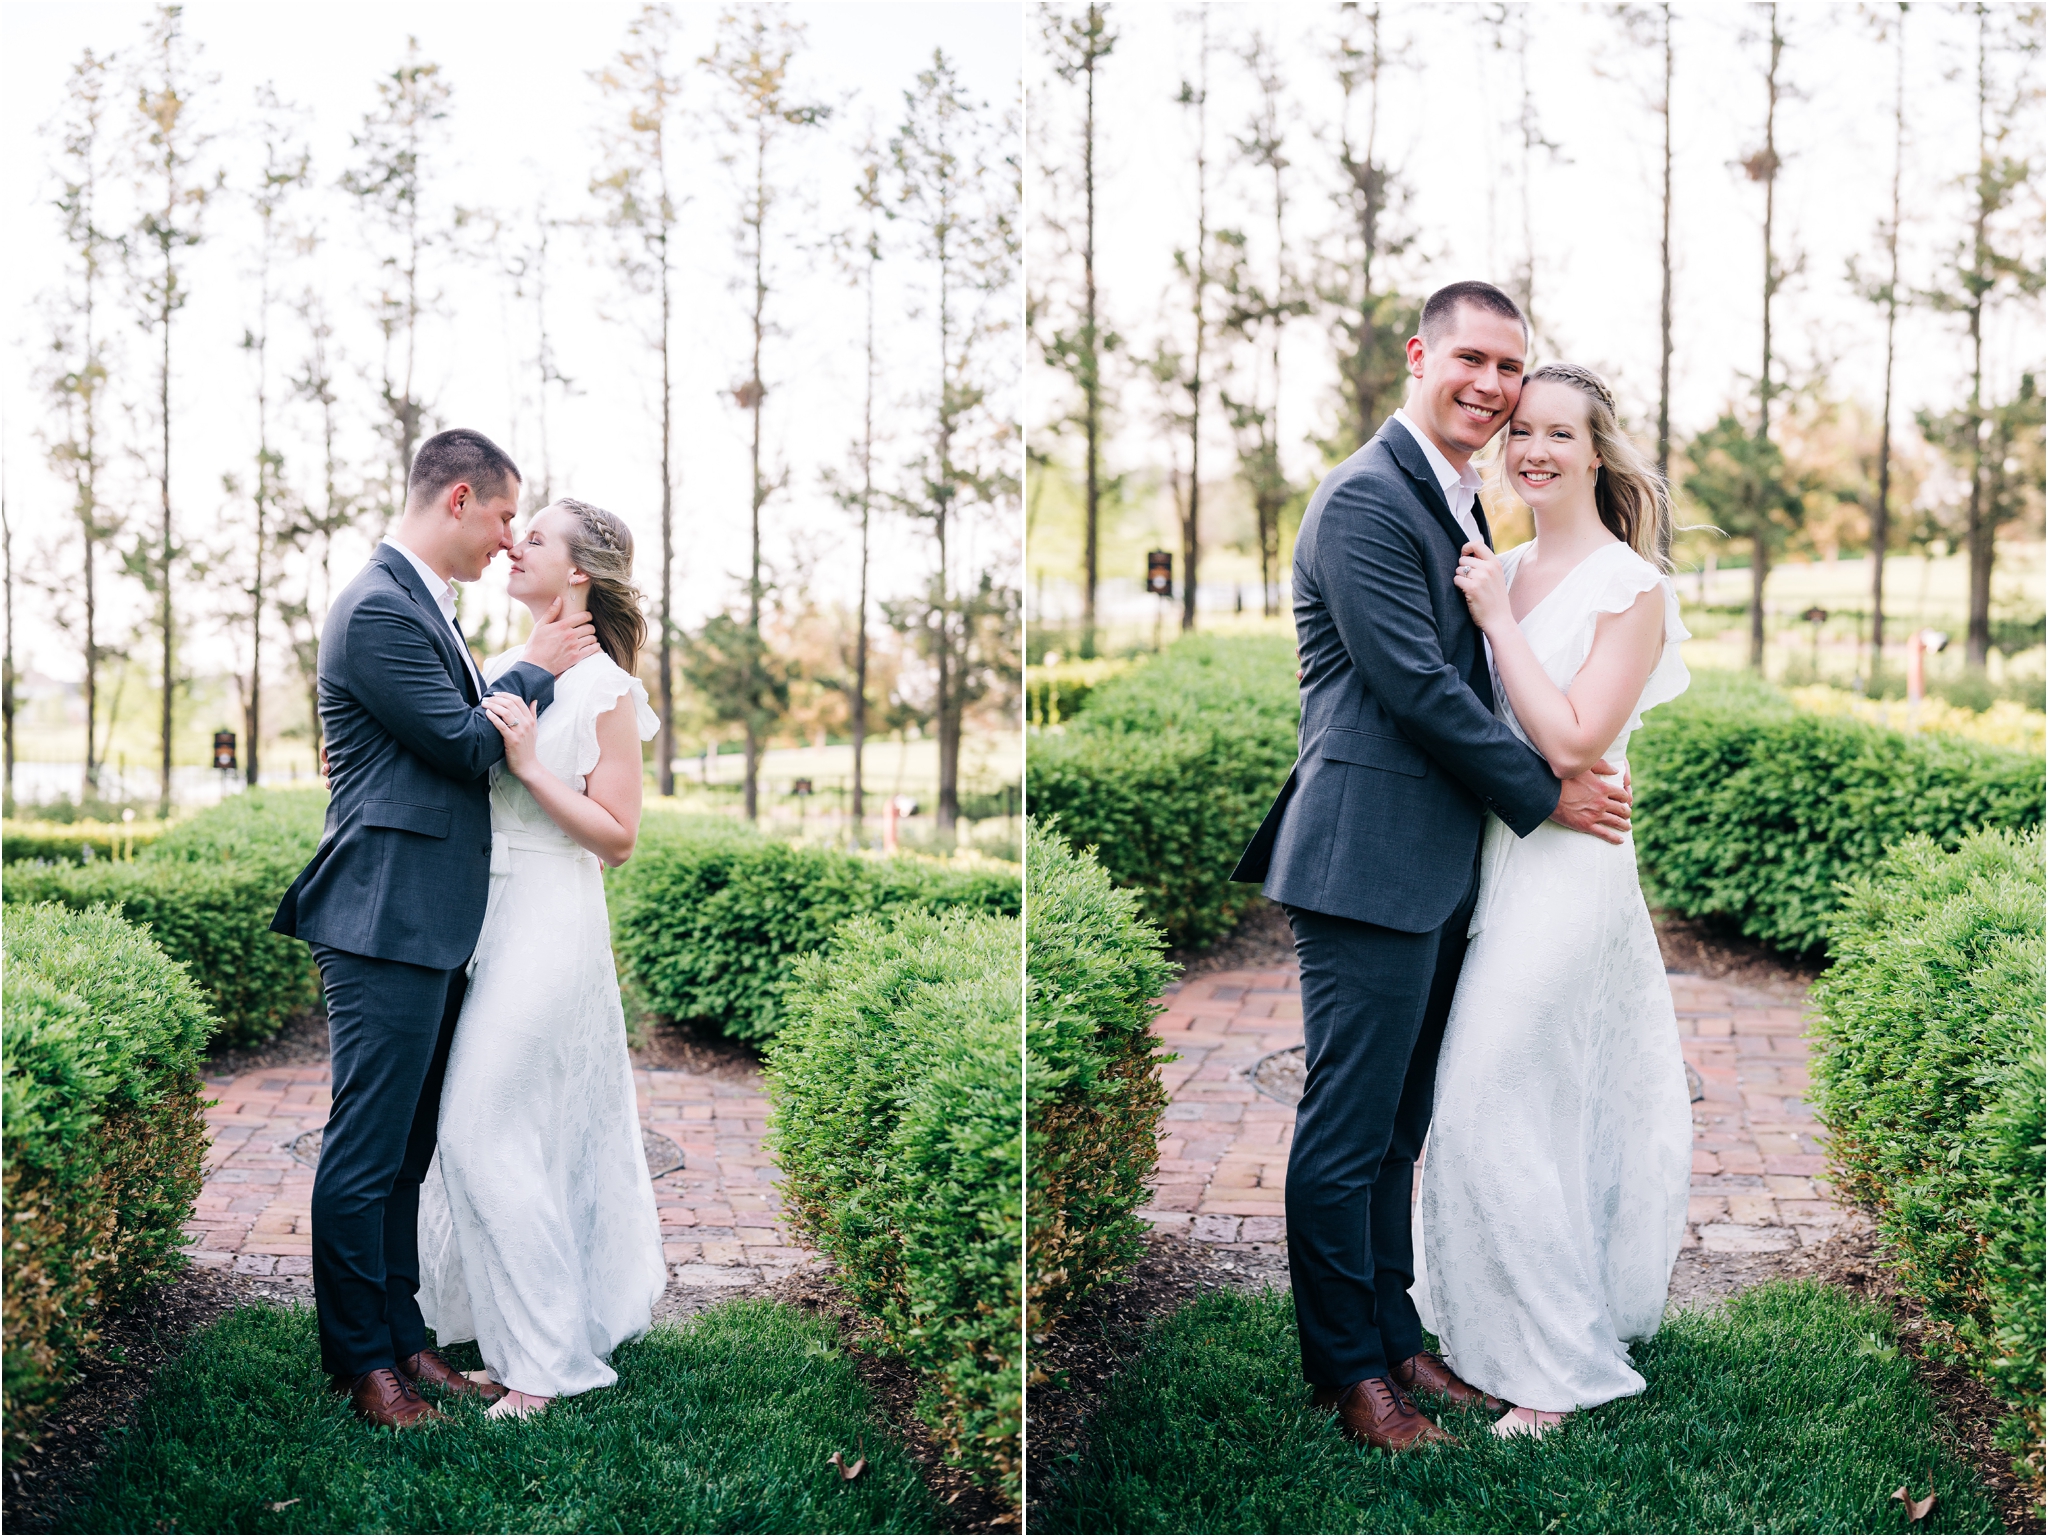 white engagement dress and suit for photos